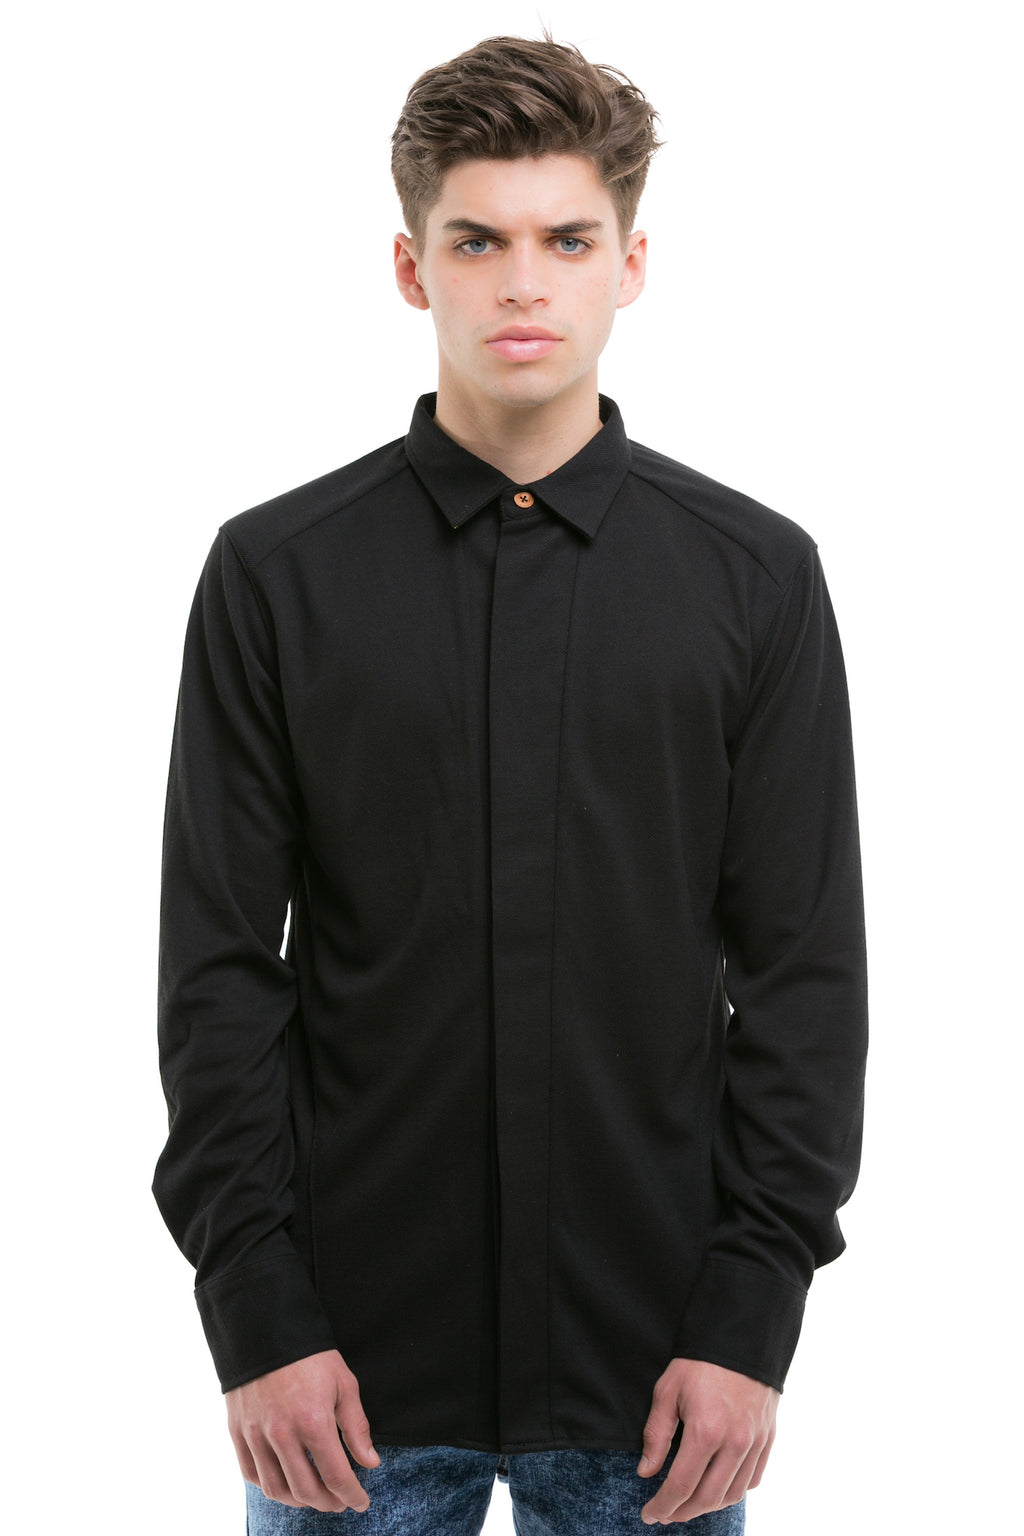 Black Japanese Shirt With Heavy Cotton Blend - Front View